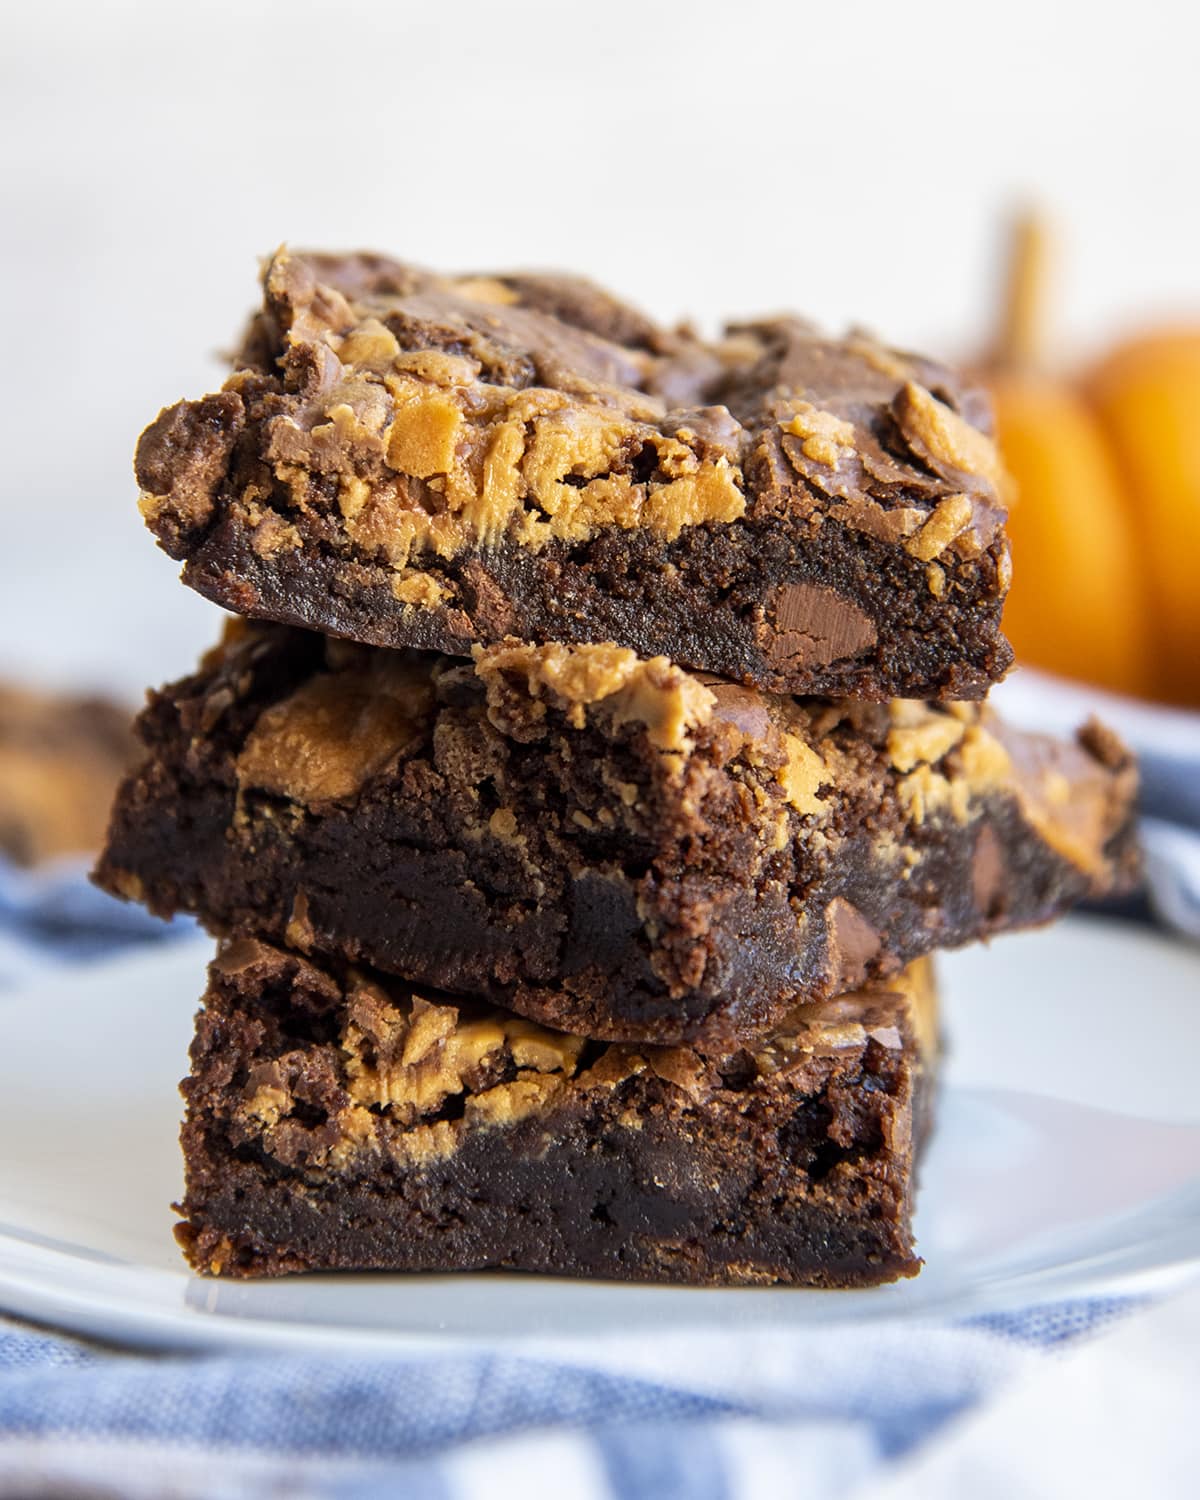 A stack of three peanut butter butterfinger brownies on a plate.